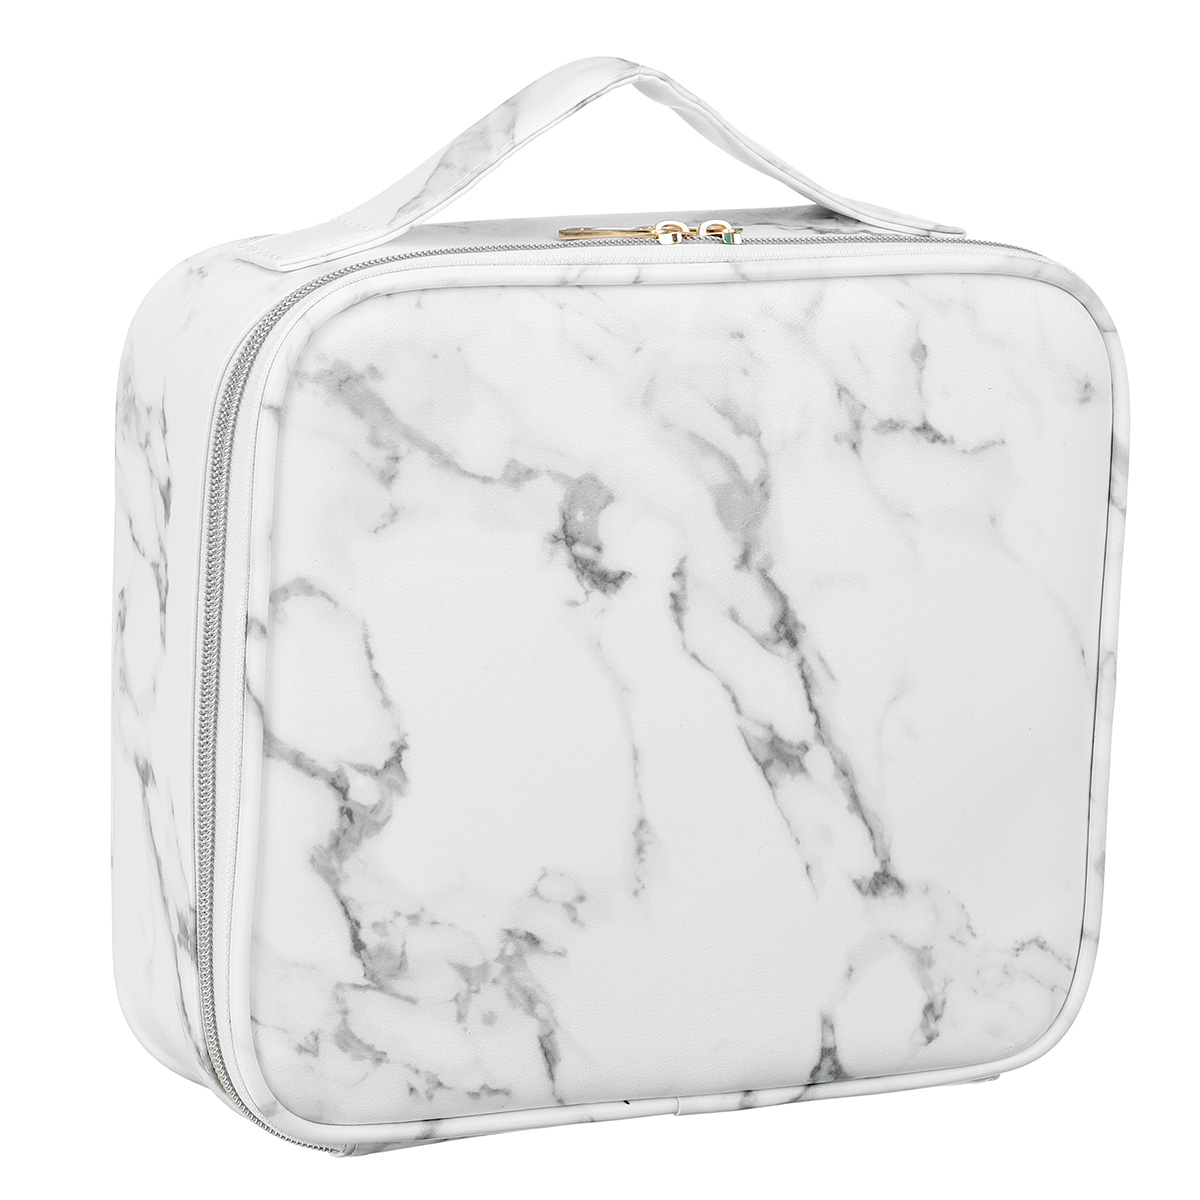 Portable-Large-Capacity-Multi-Grid-Cosmetic-Make-Up-Nail-Toiletry-Travel-Carry-Bag-Storage-Bag-Beaut-1859825-3